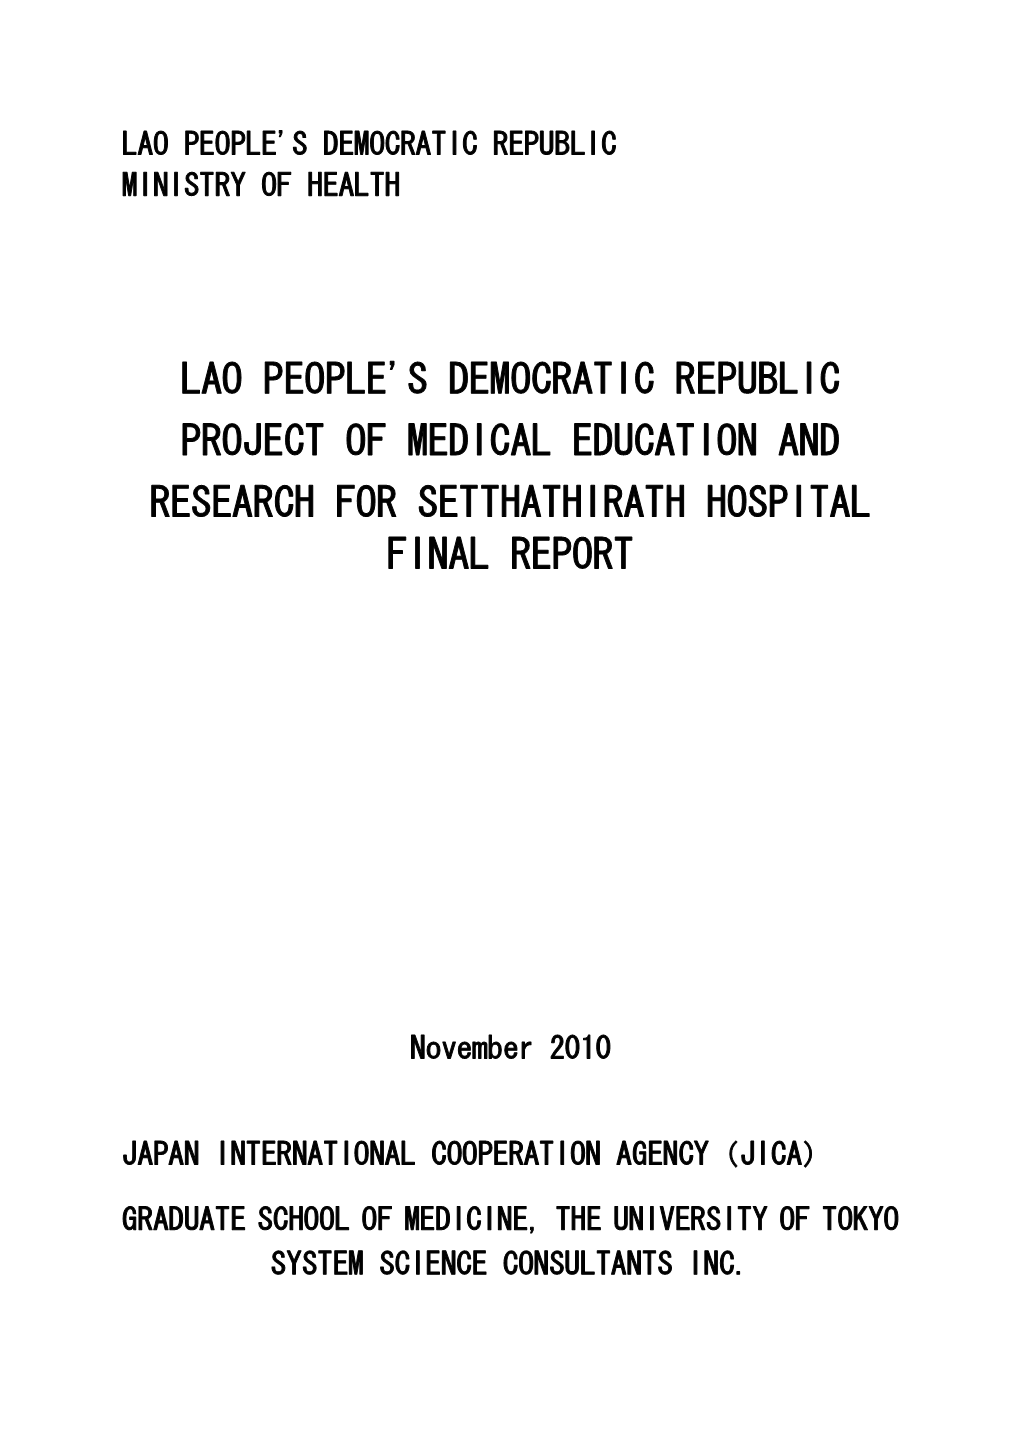 Lao People's Democratic Republic Project of Medical Education and Research for Setthathirath Hospital Final Report